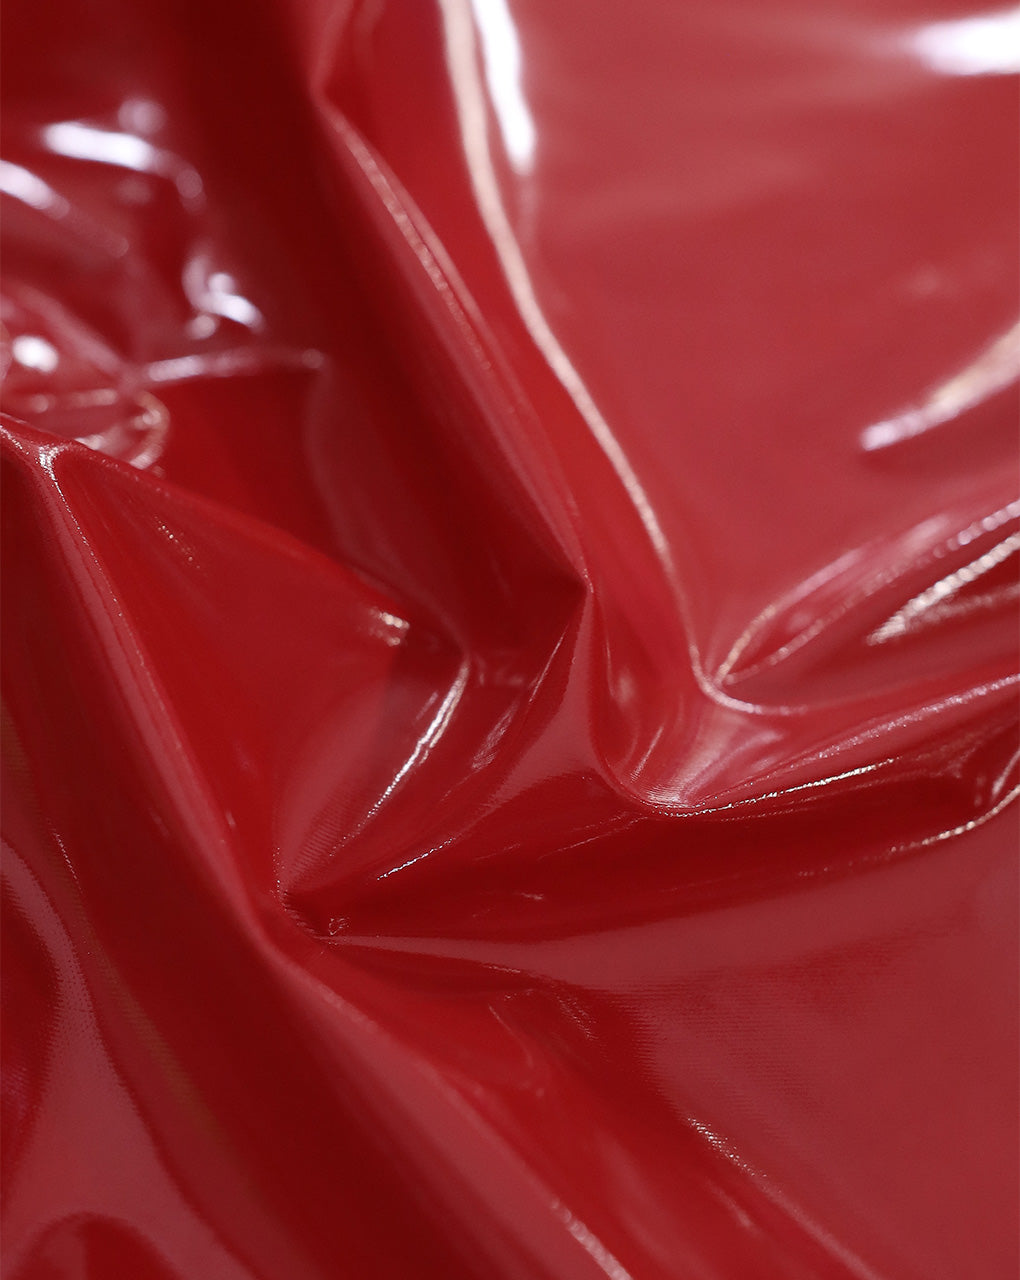 RED LEATHERITE FABRIC